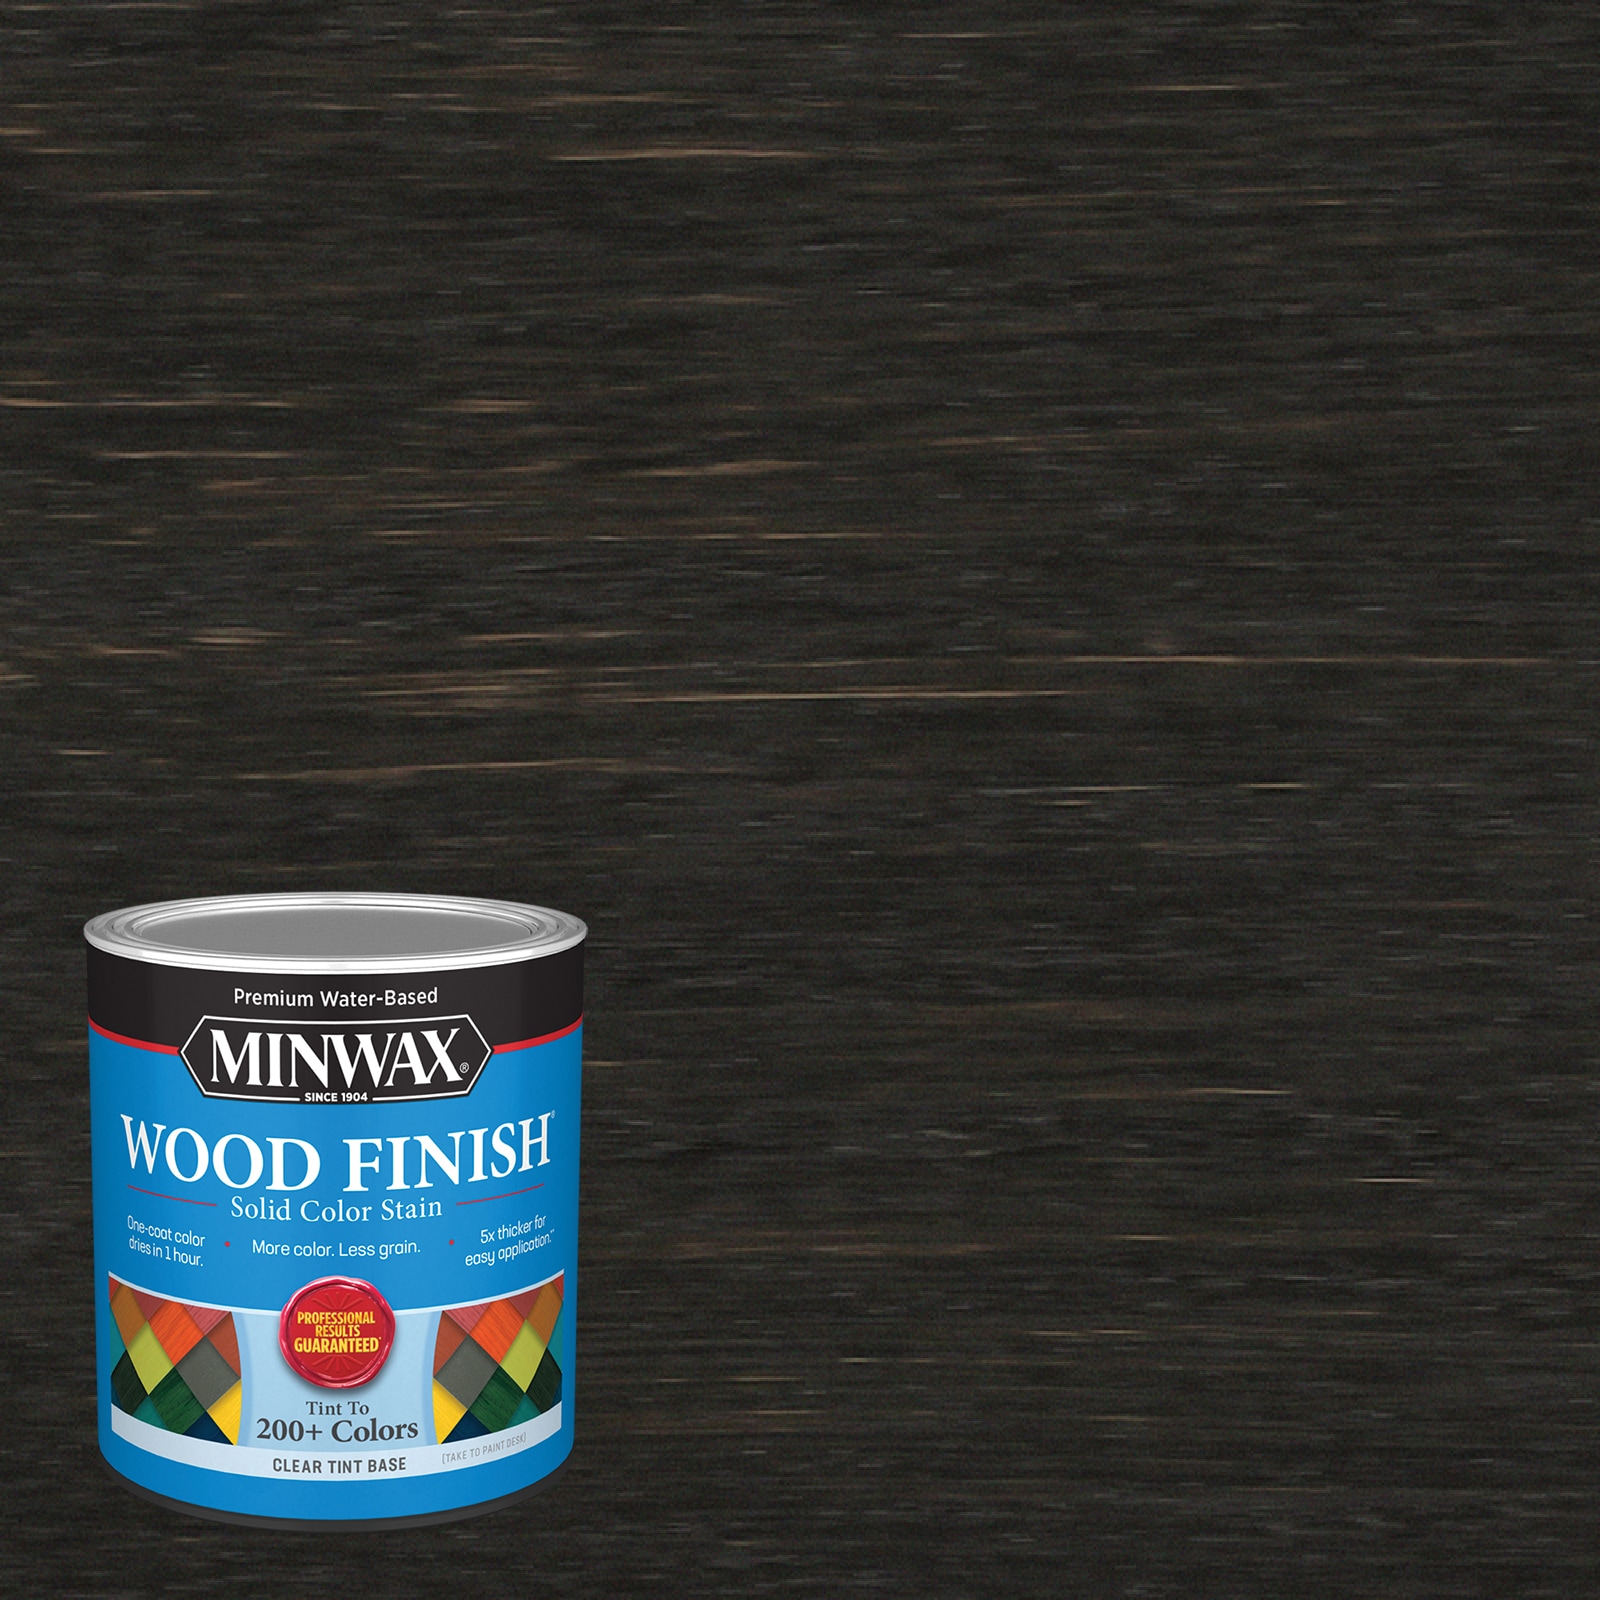 Minwax Wood Finish Water-Based Black Mw1173 Solid Interior Stain